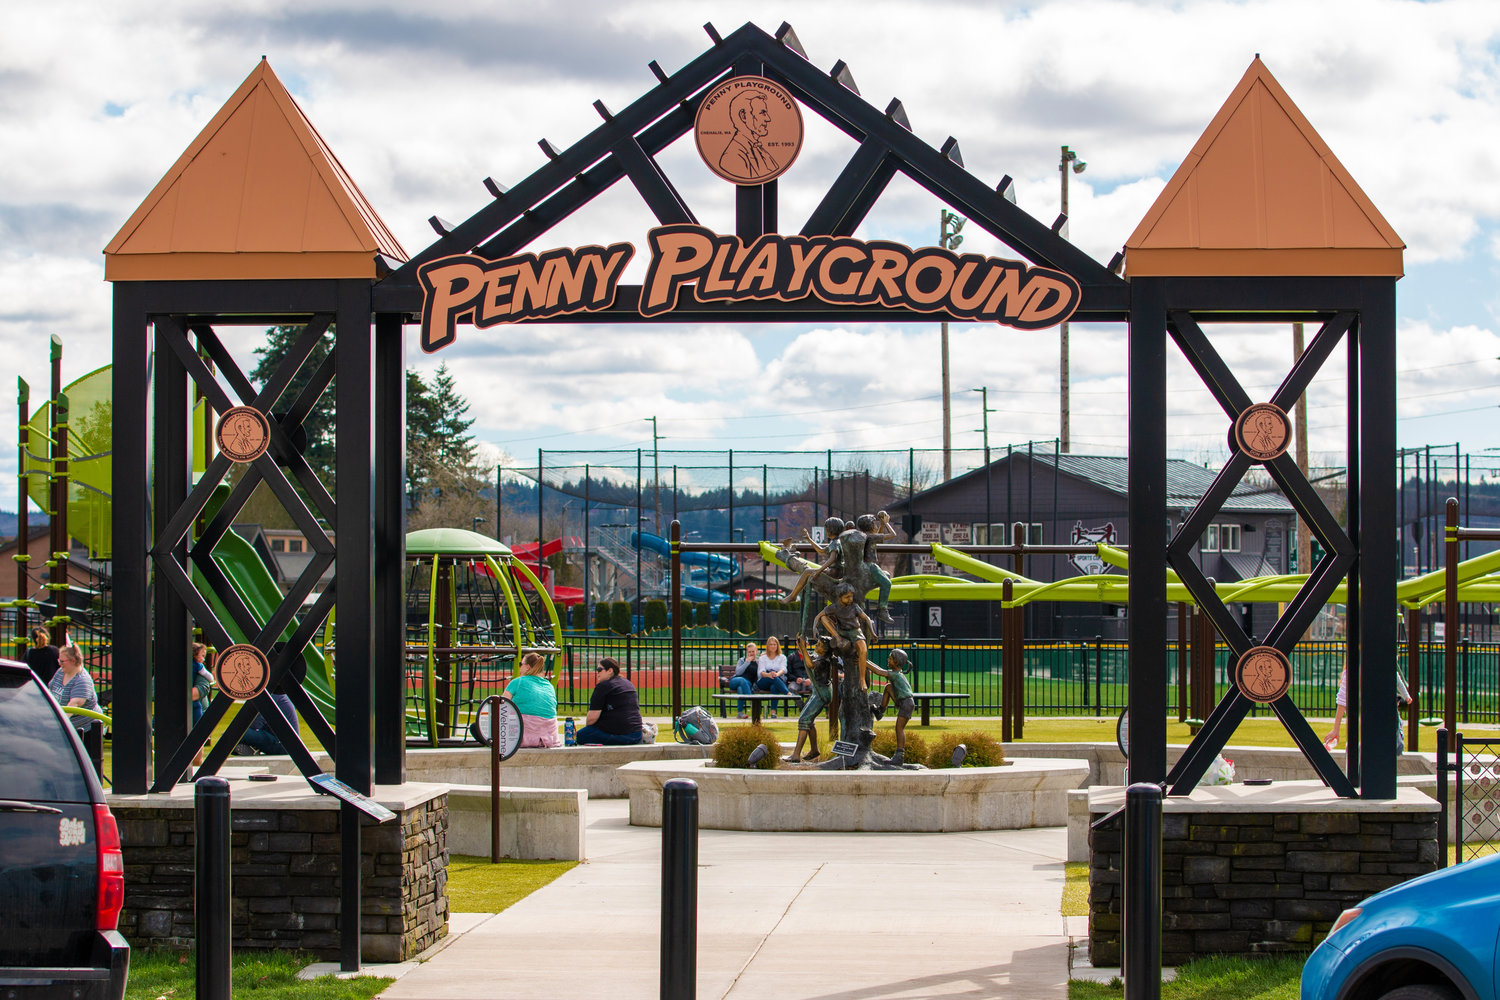 Penny Playground in Chehalis